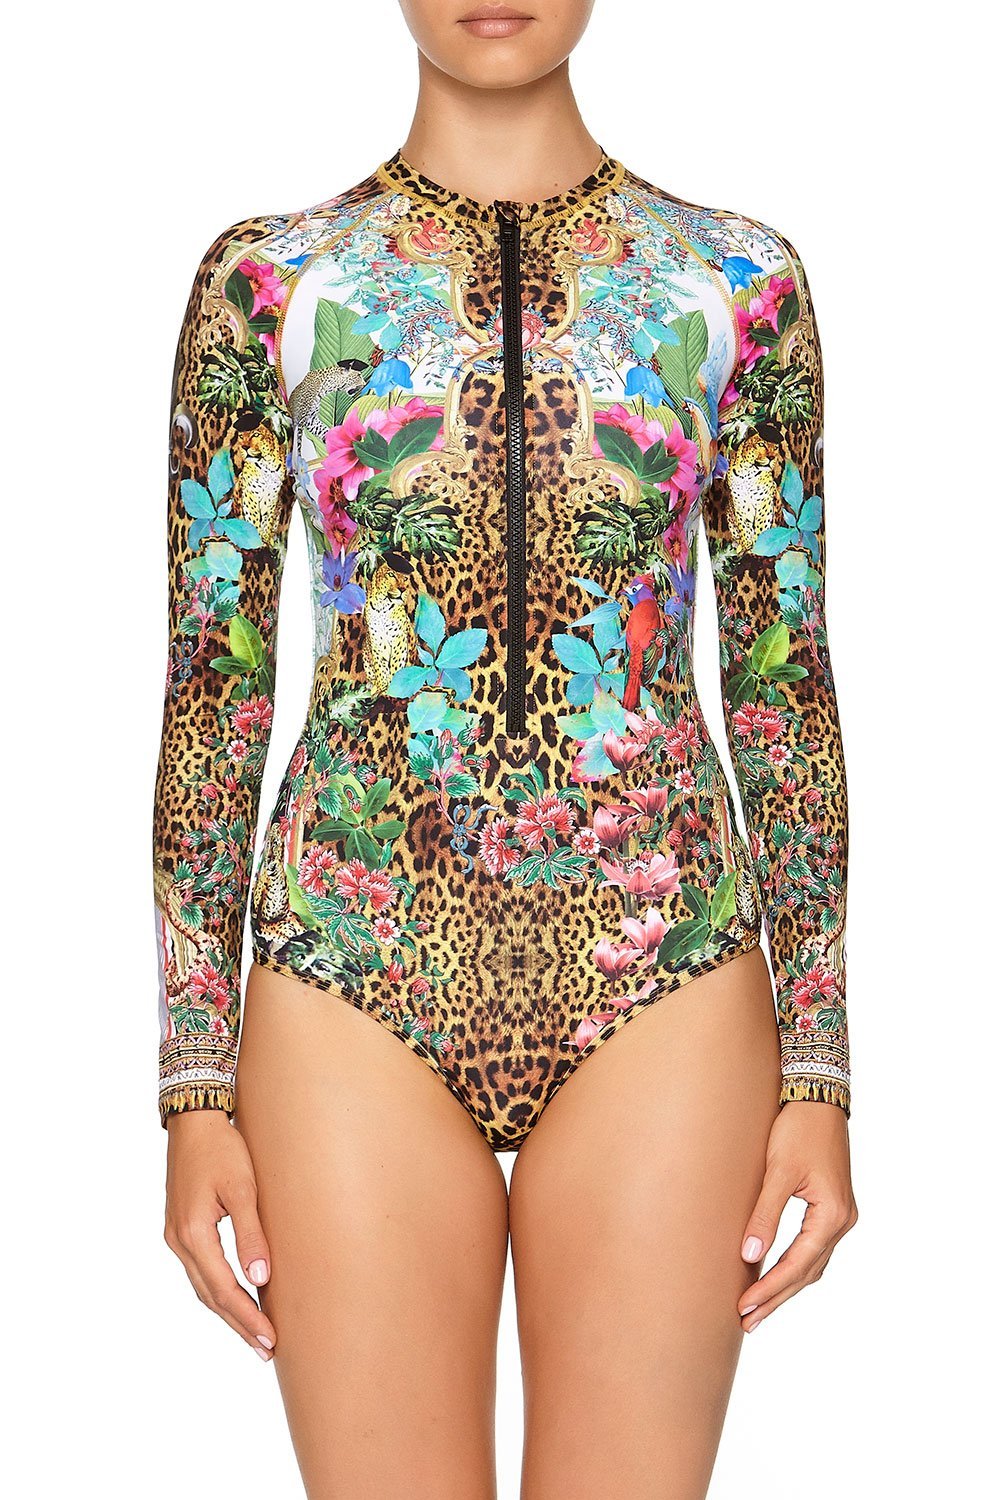 CAMILLA ZIP FRONT PADDLESUIT CHAMPAGNE COAST